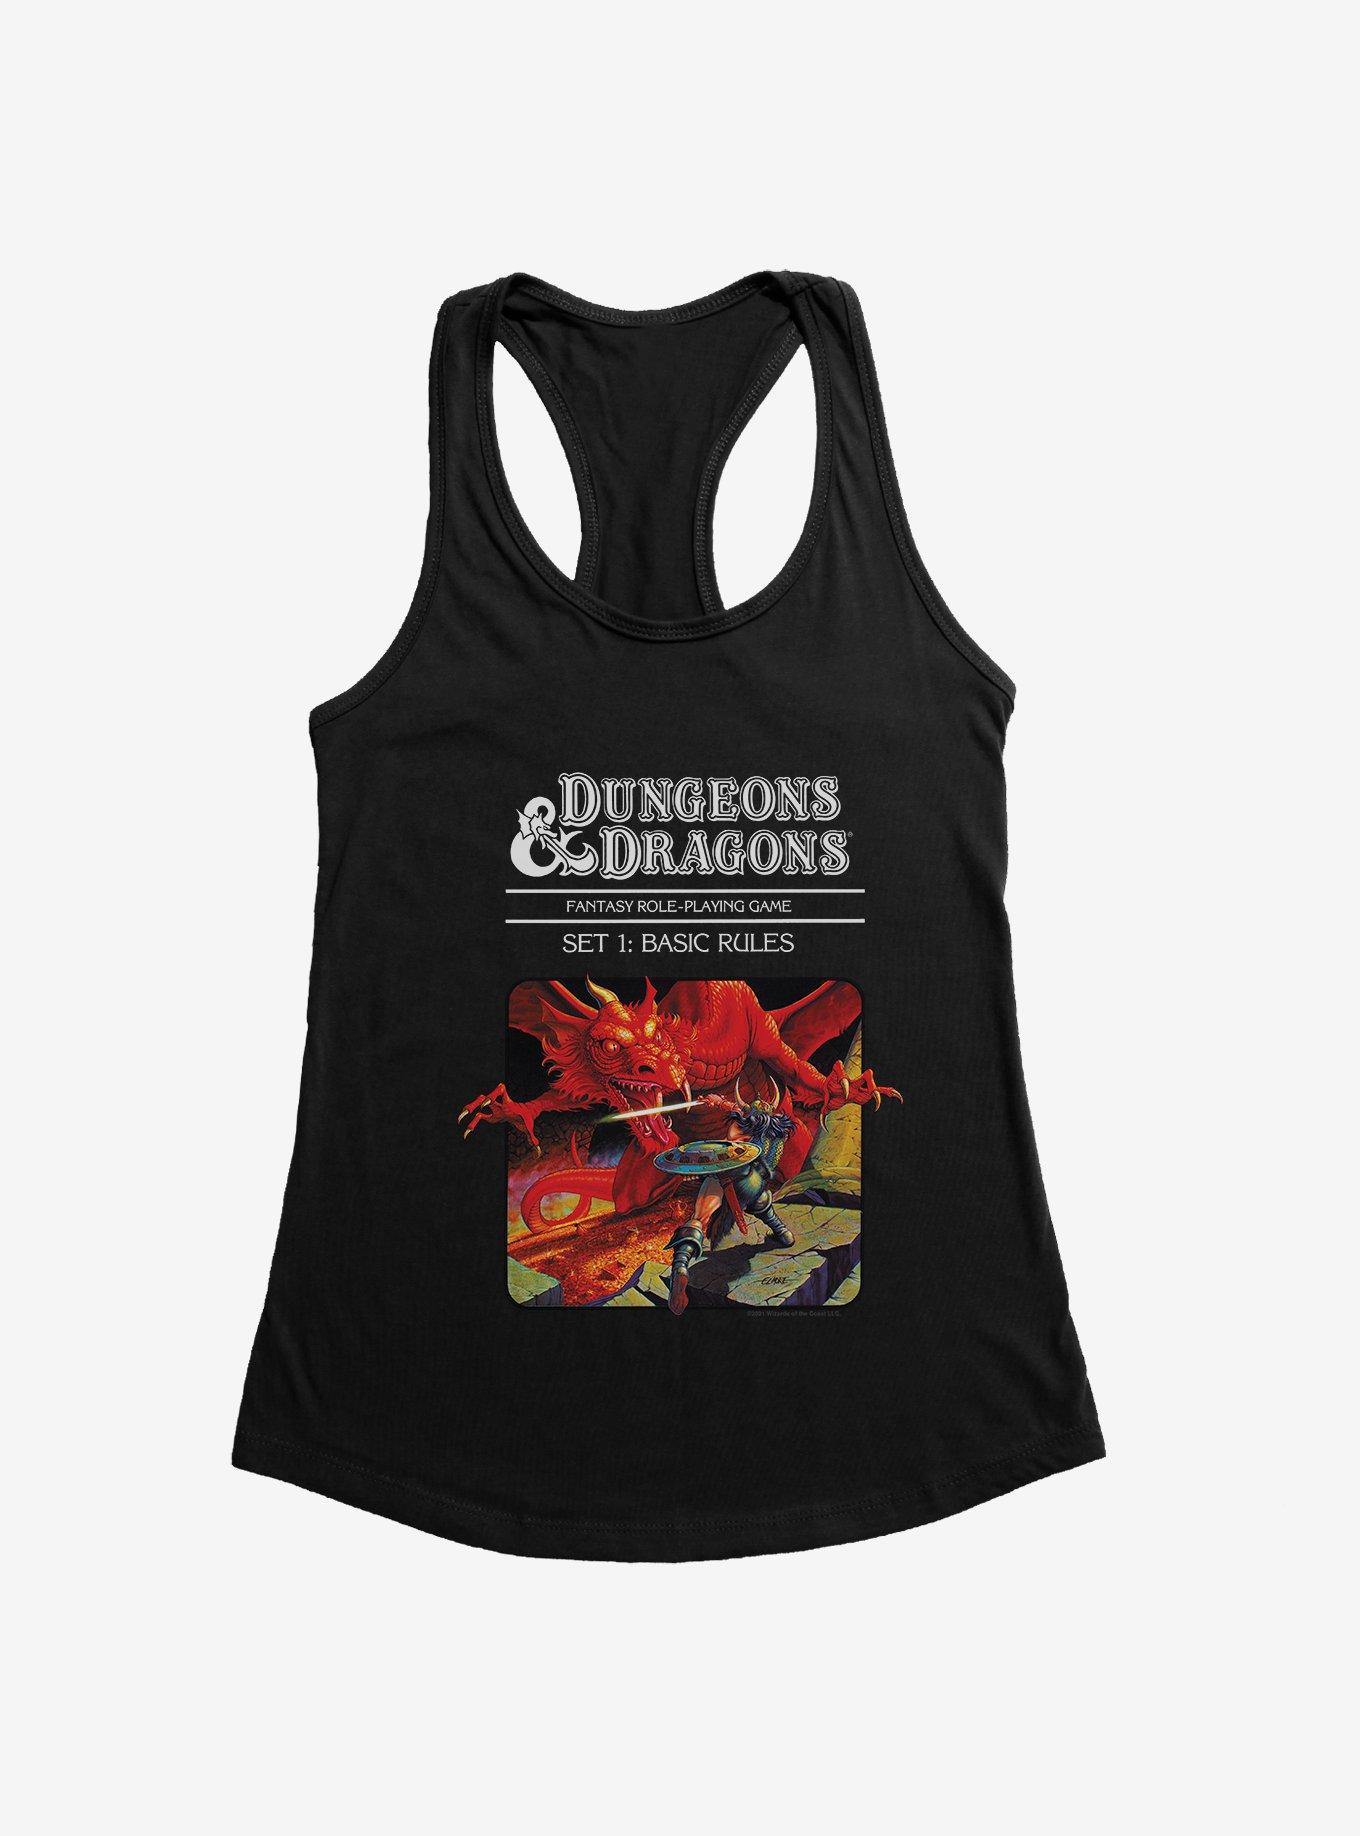 Dungeons & Dragons Vintage Dragon and the Knight Girls Tank